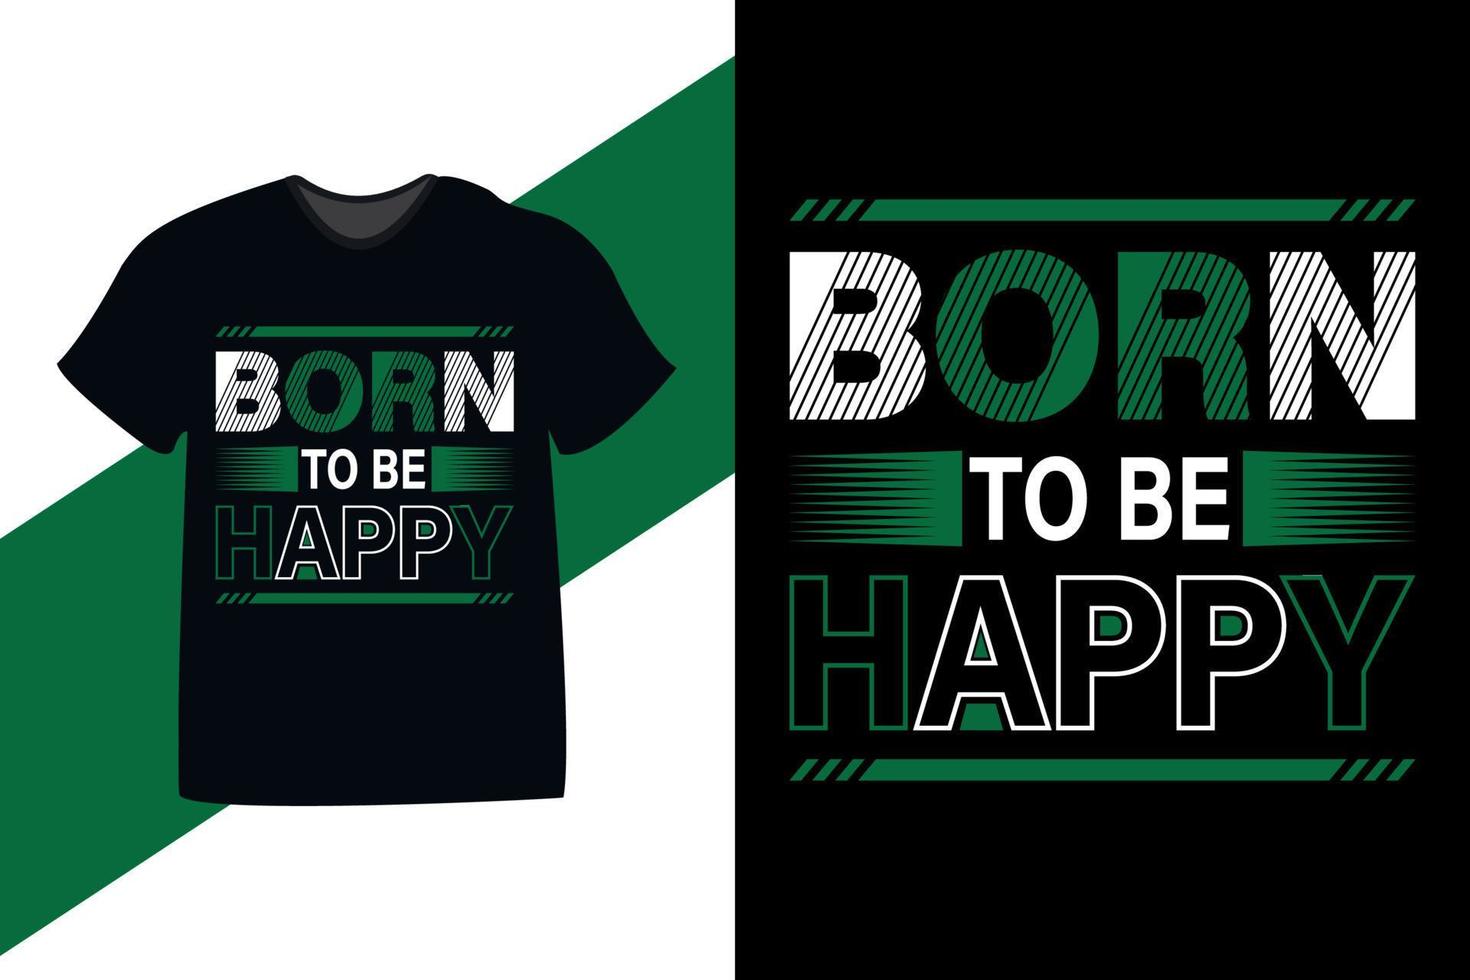 Born to be happy motivational quote typography Tshirt design vector